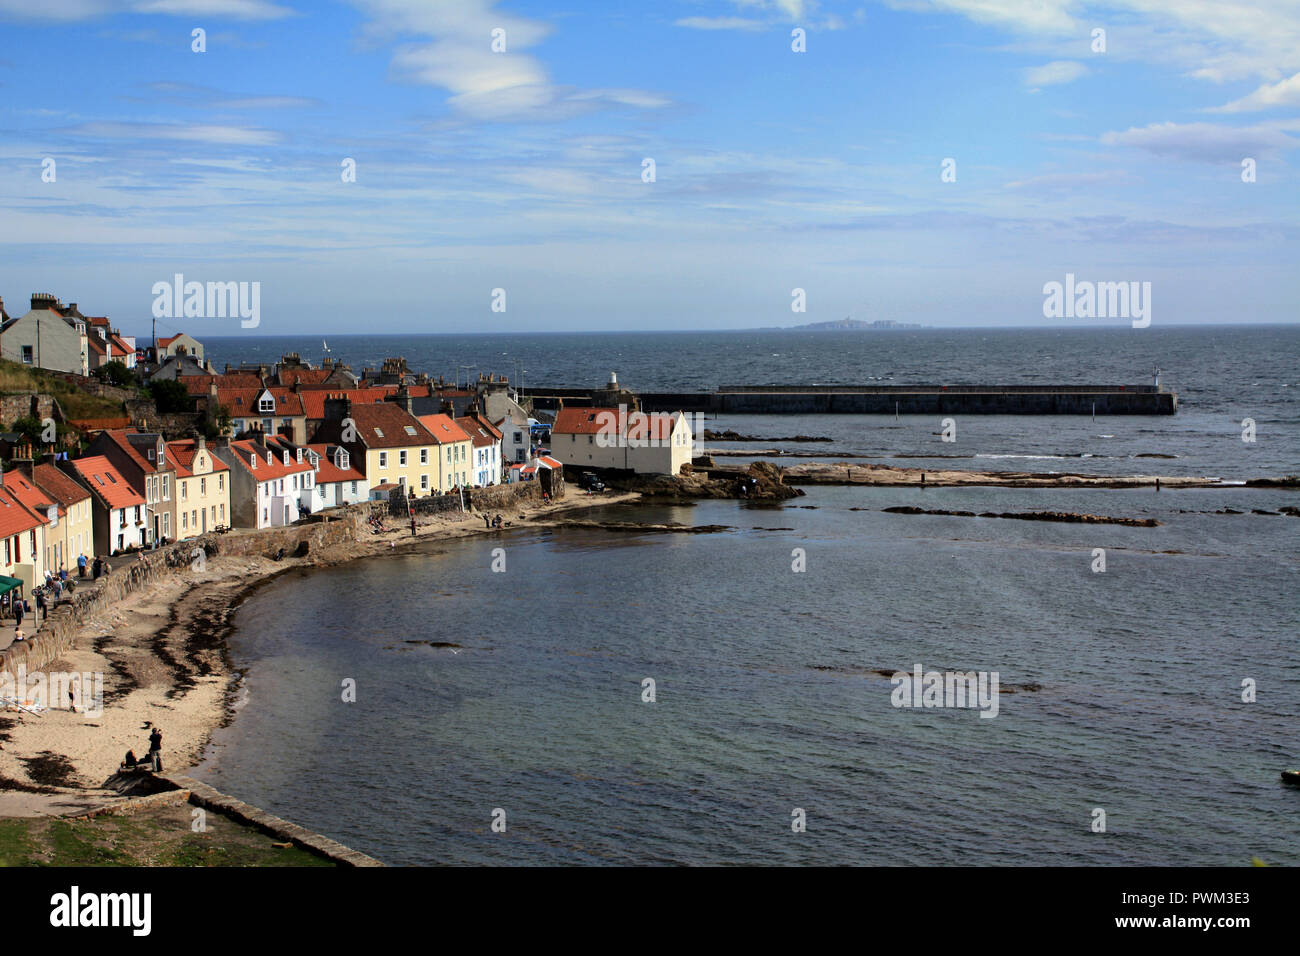 A view of Pittenweem fishing village on the east coast of Scotland. Stock Photo